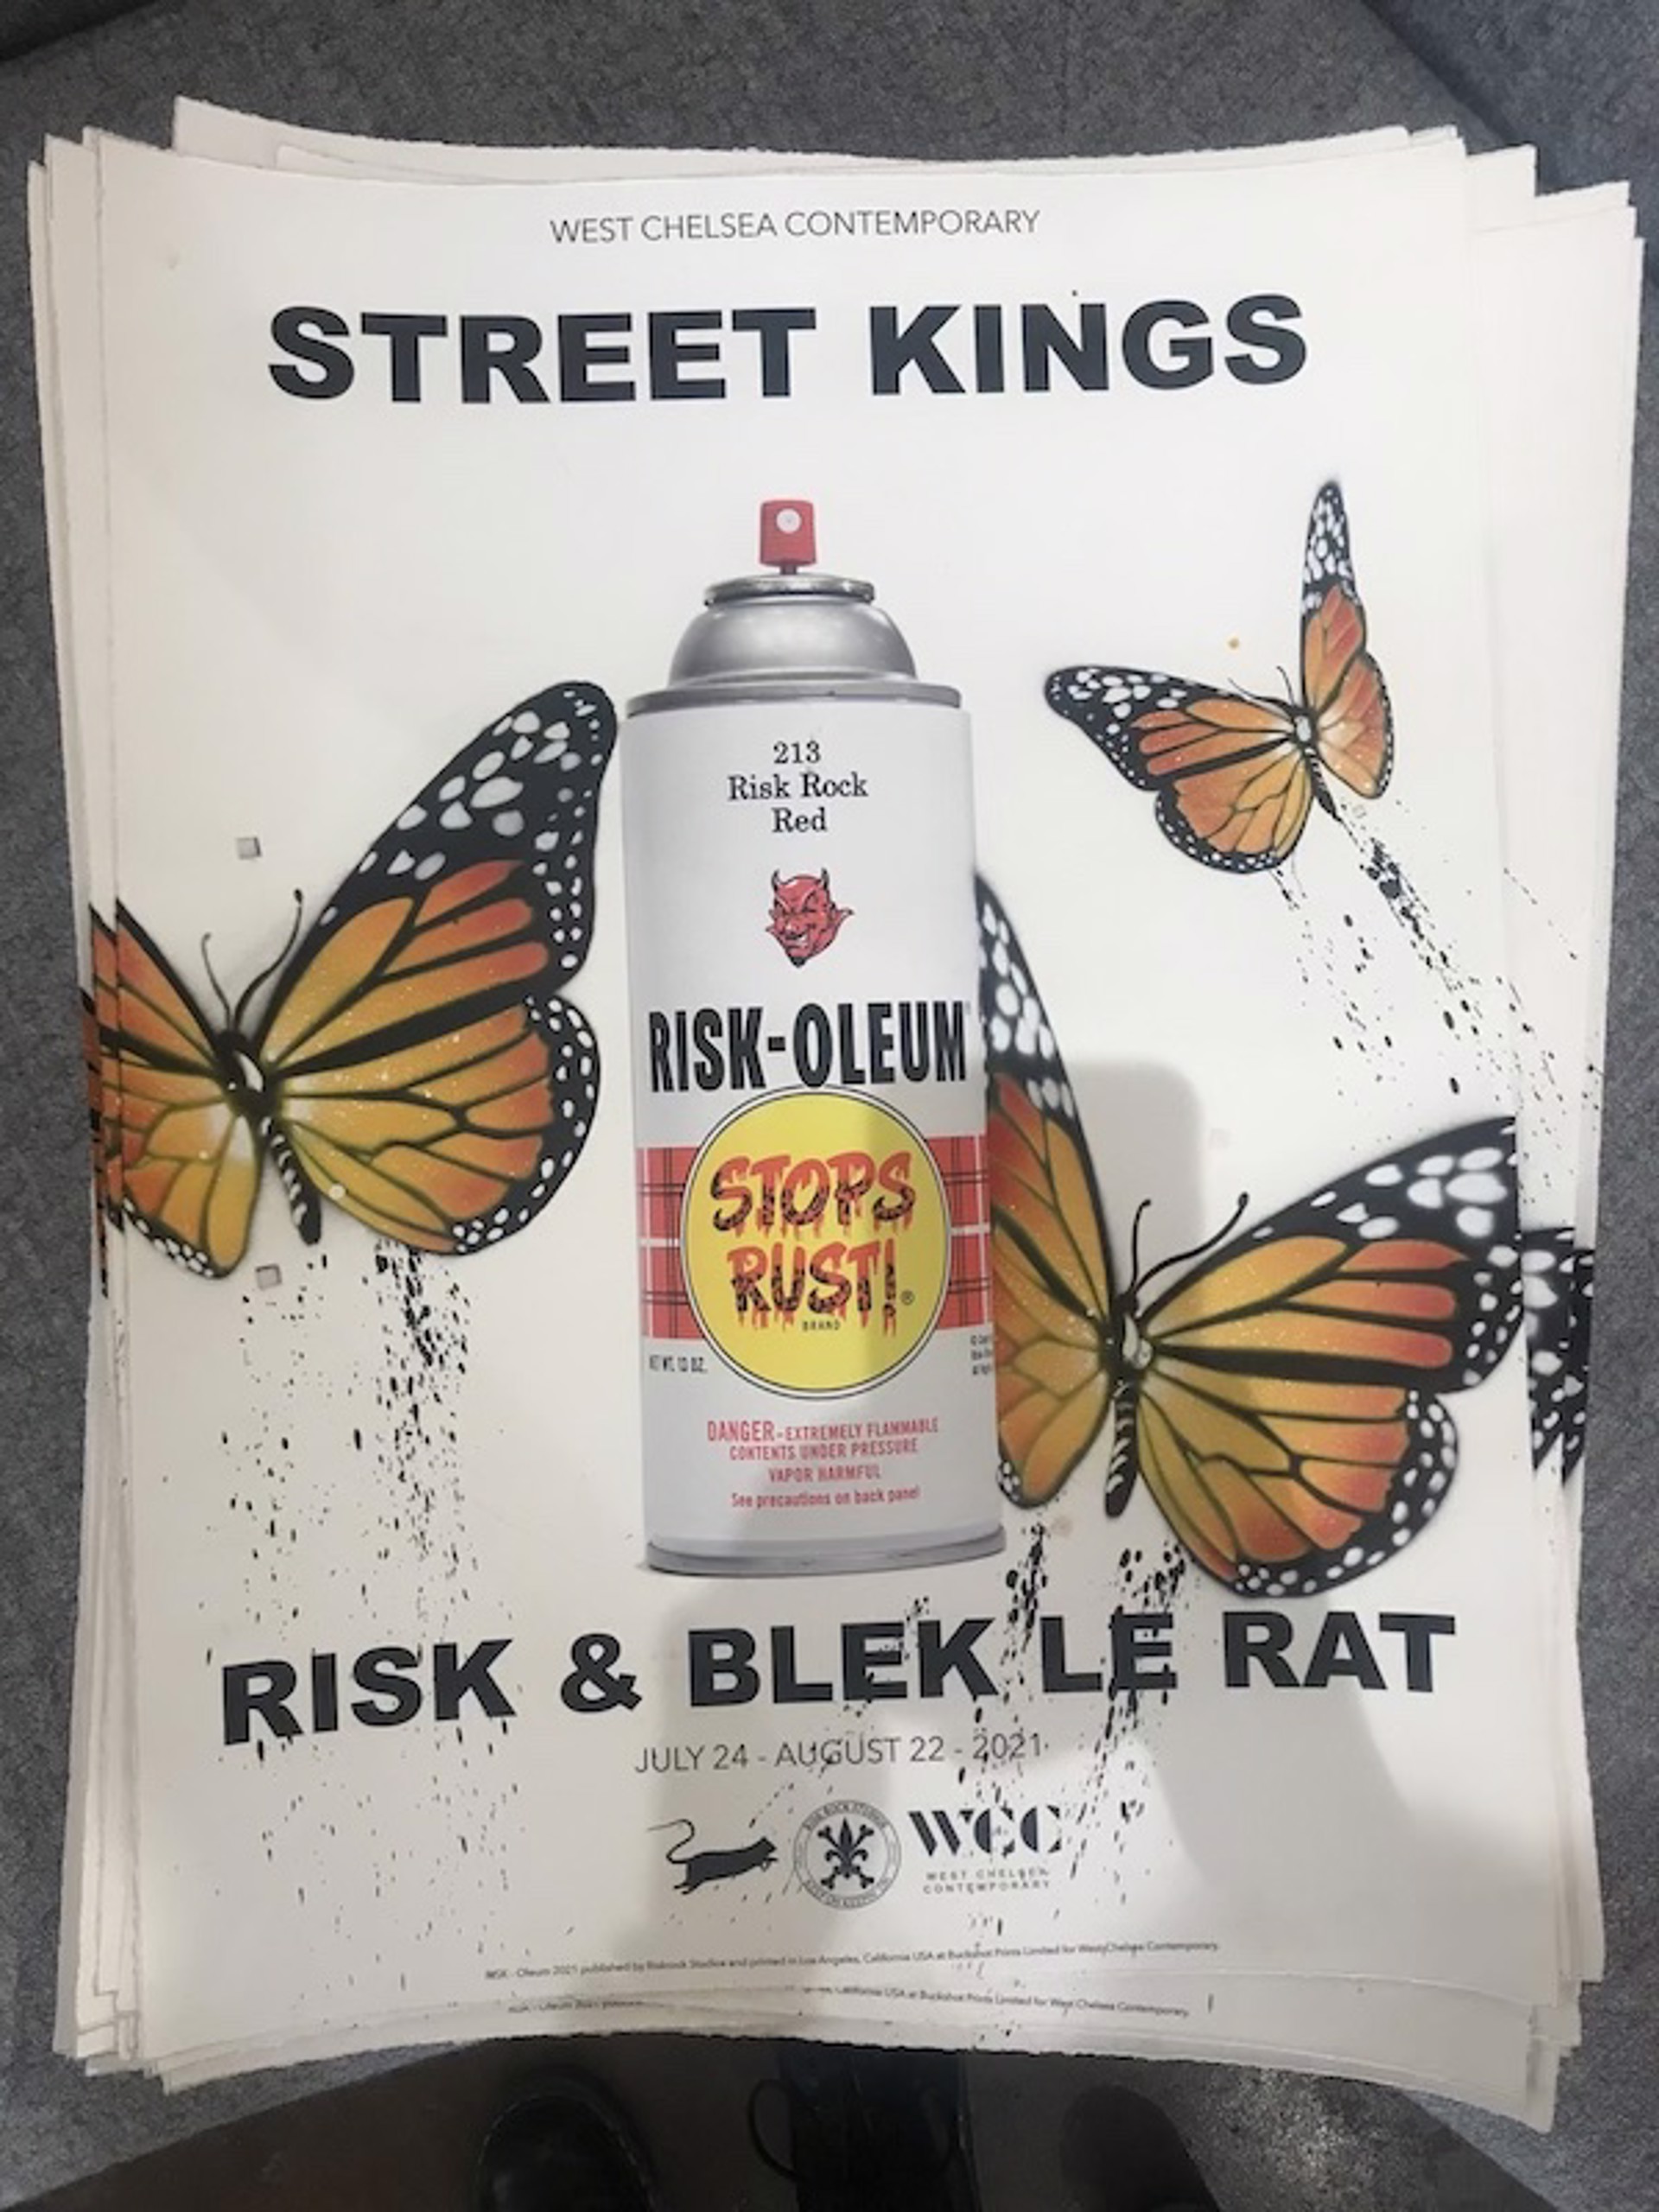 Street Kings Show Print (21/50) by Risk